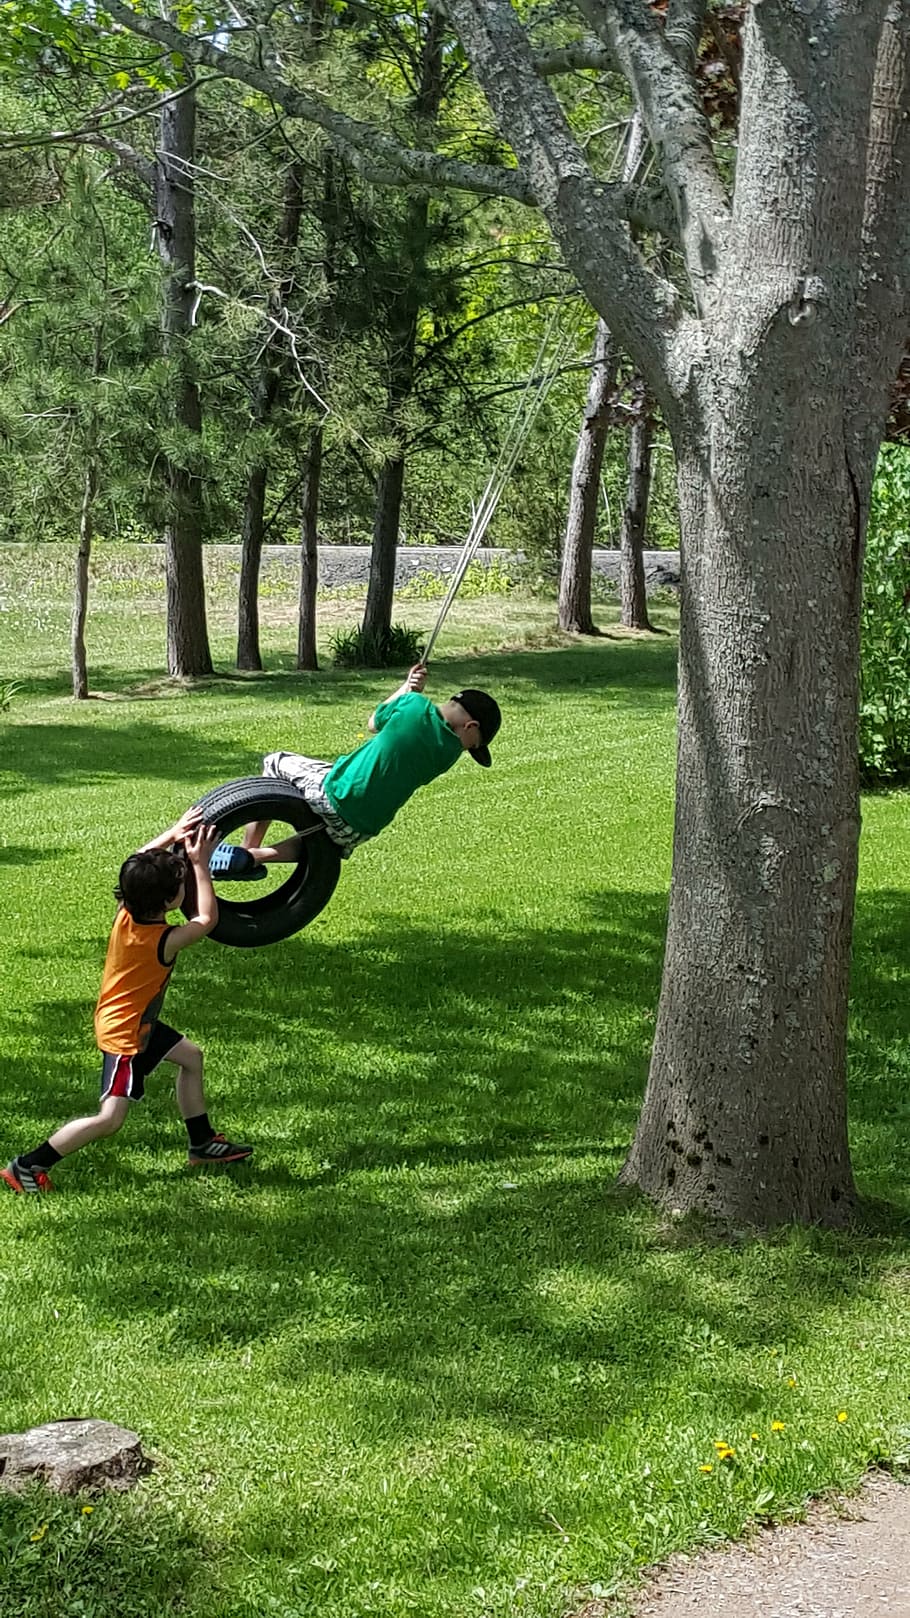 outdoors, kids, playing, son, summer, boy, family outdoors, child, together, tire swing